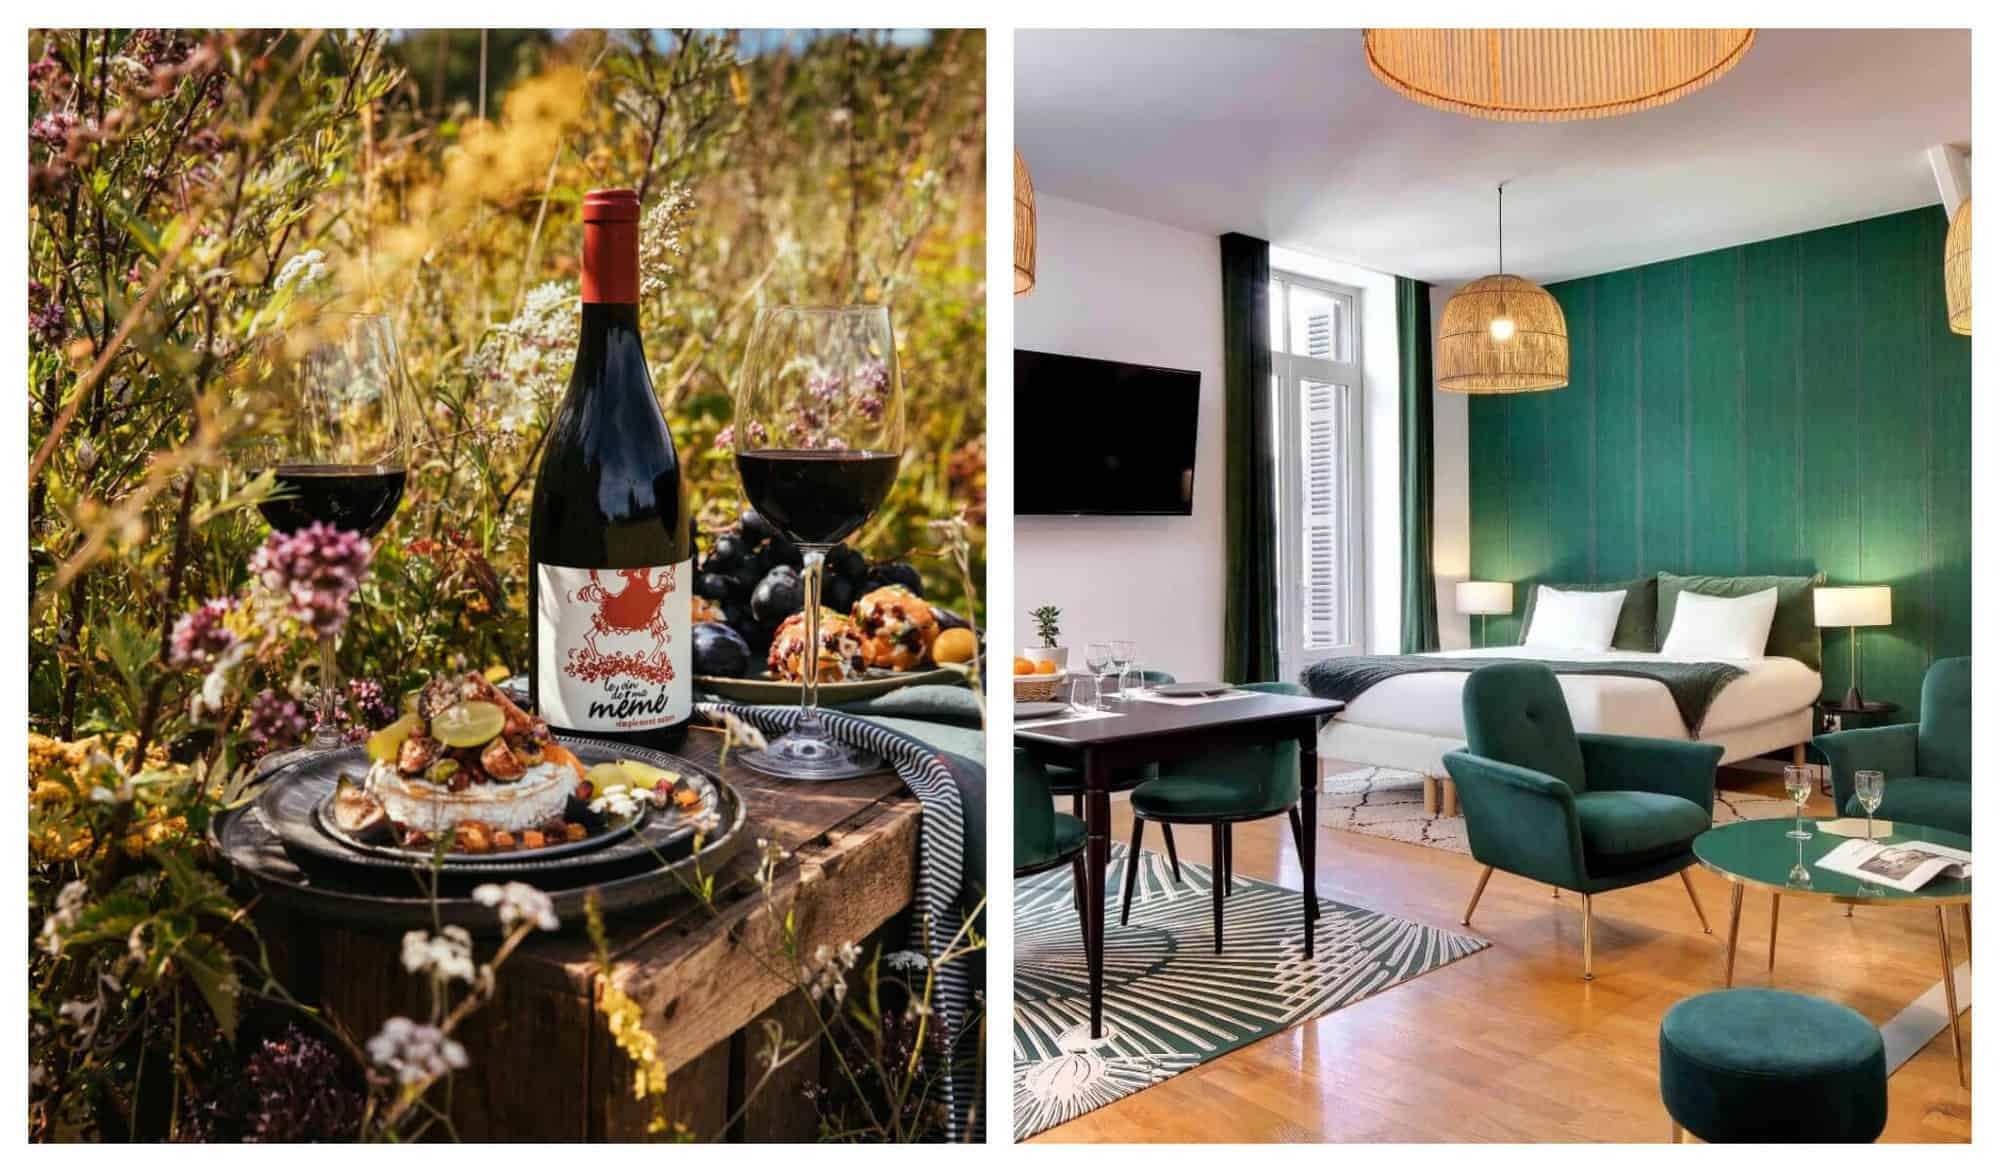 Left: A bottle of wine with red and white design, in between two glasses of red wine, and a plate of food. Right: A hotel room decorated with green walls, green chairs, green pillows, and wooden lamps.